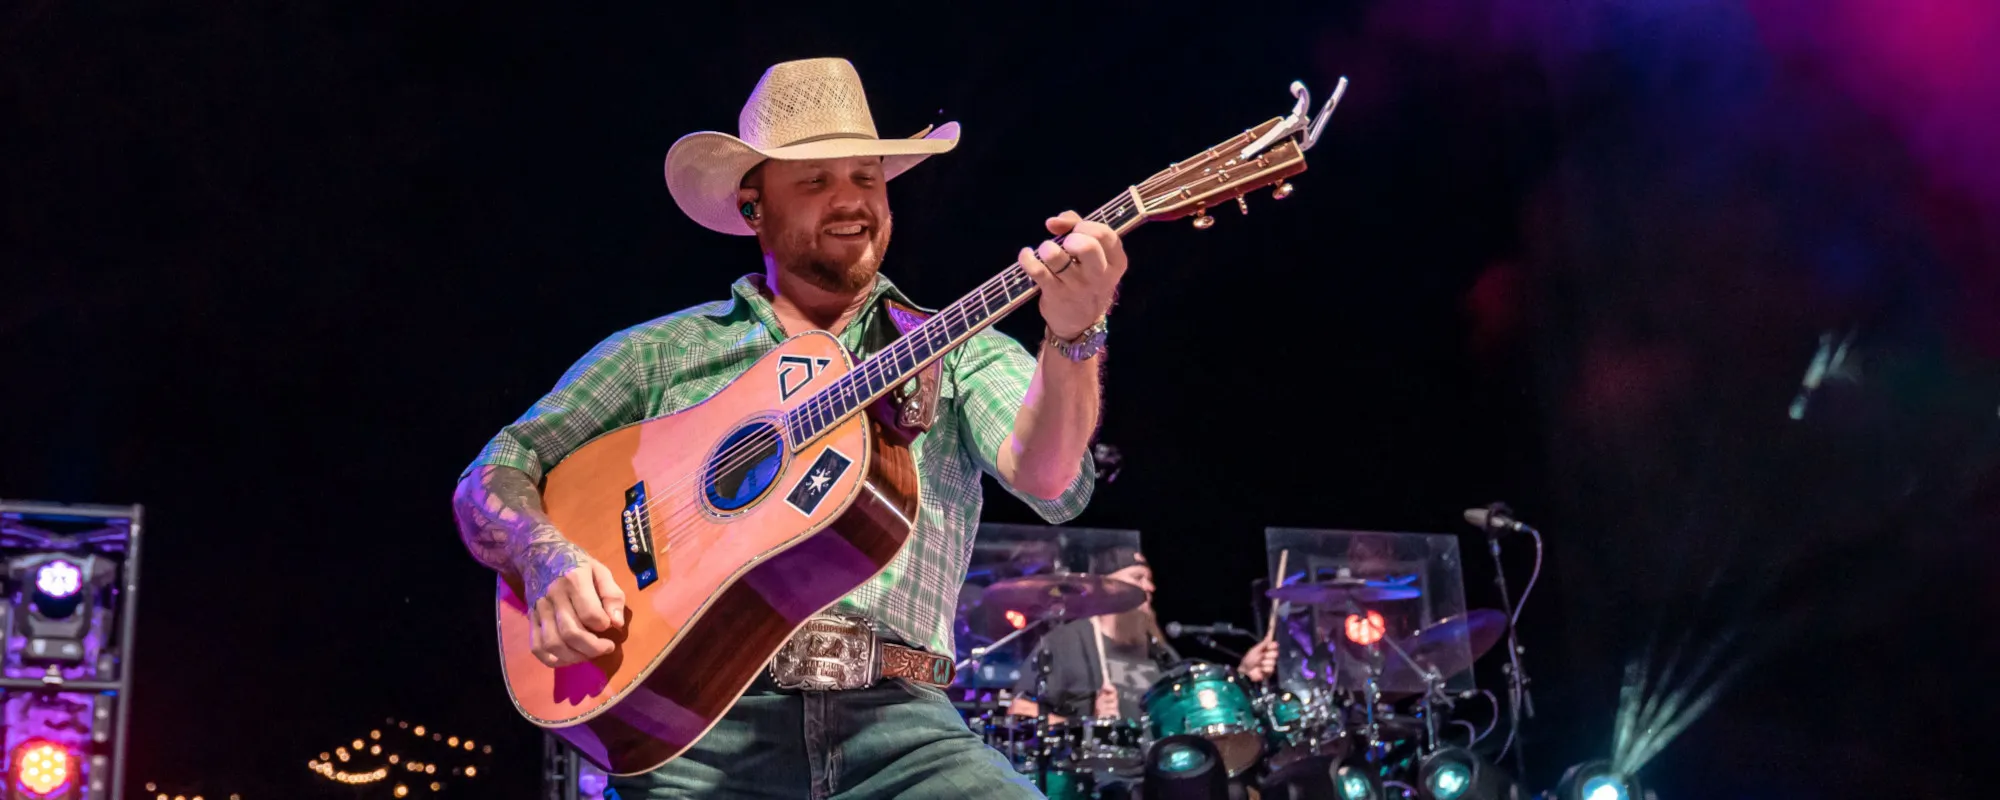 The Important Message in Cody Johnson’s “‘Til You Can’t”